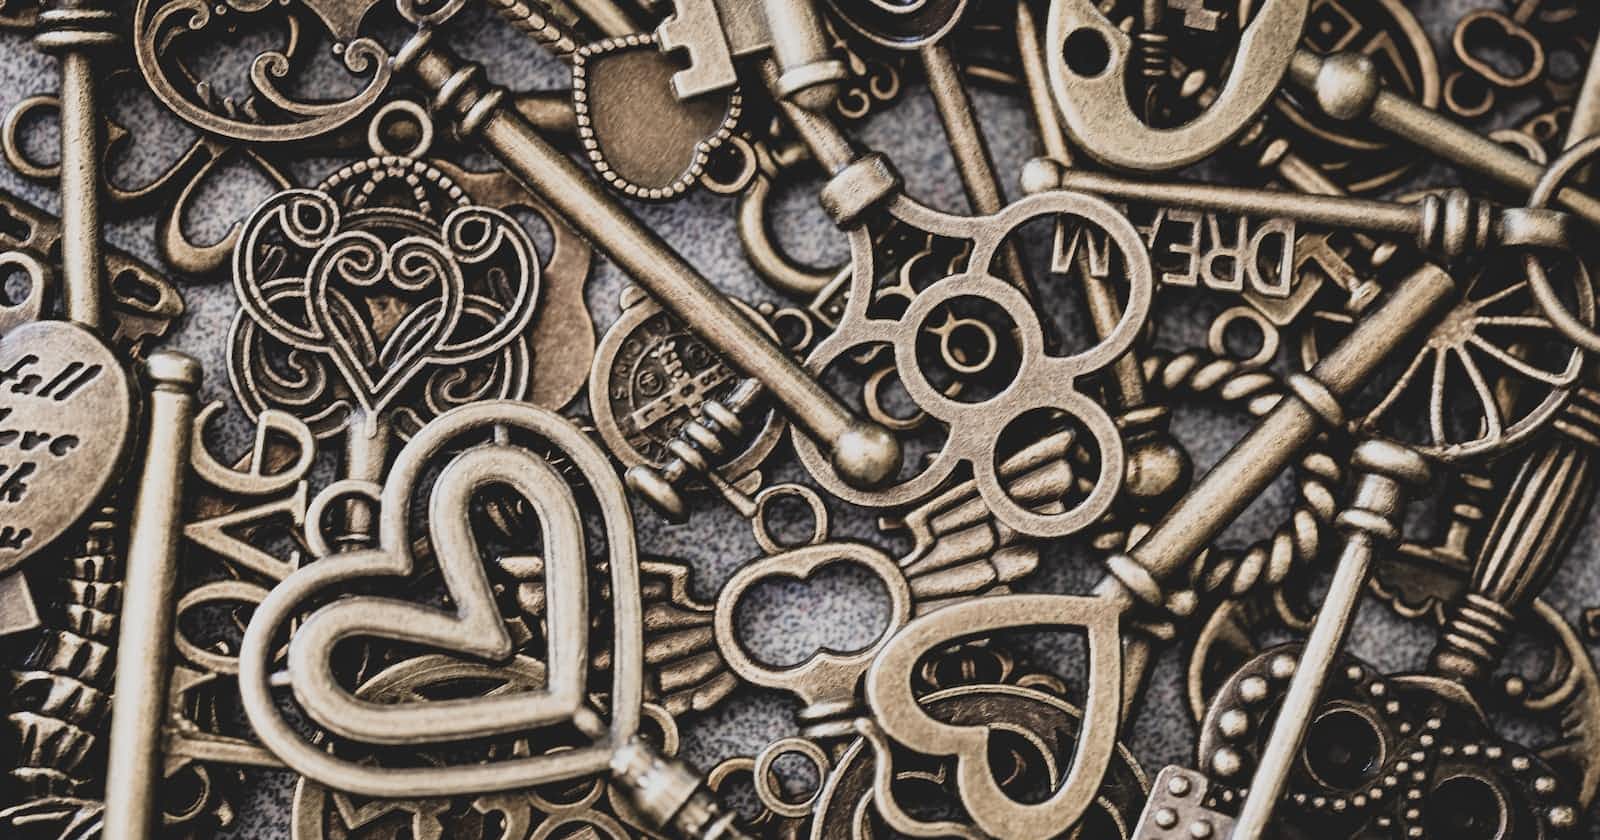 What is the importance of keys in React?